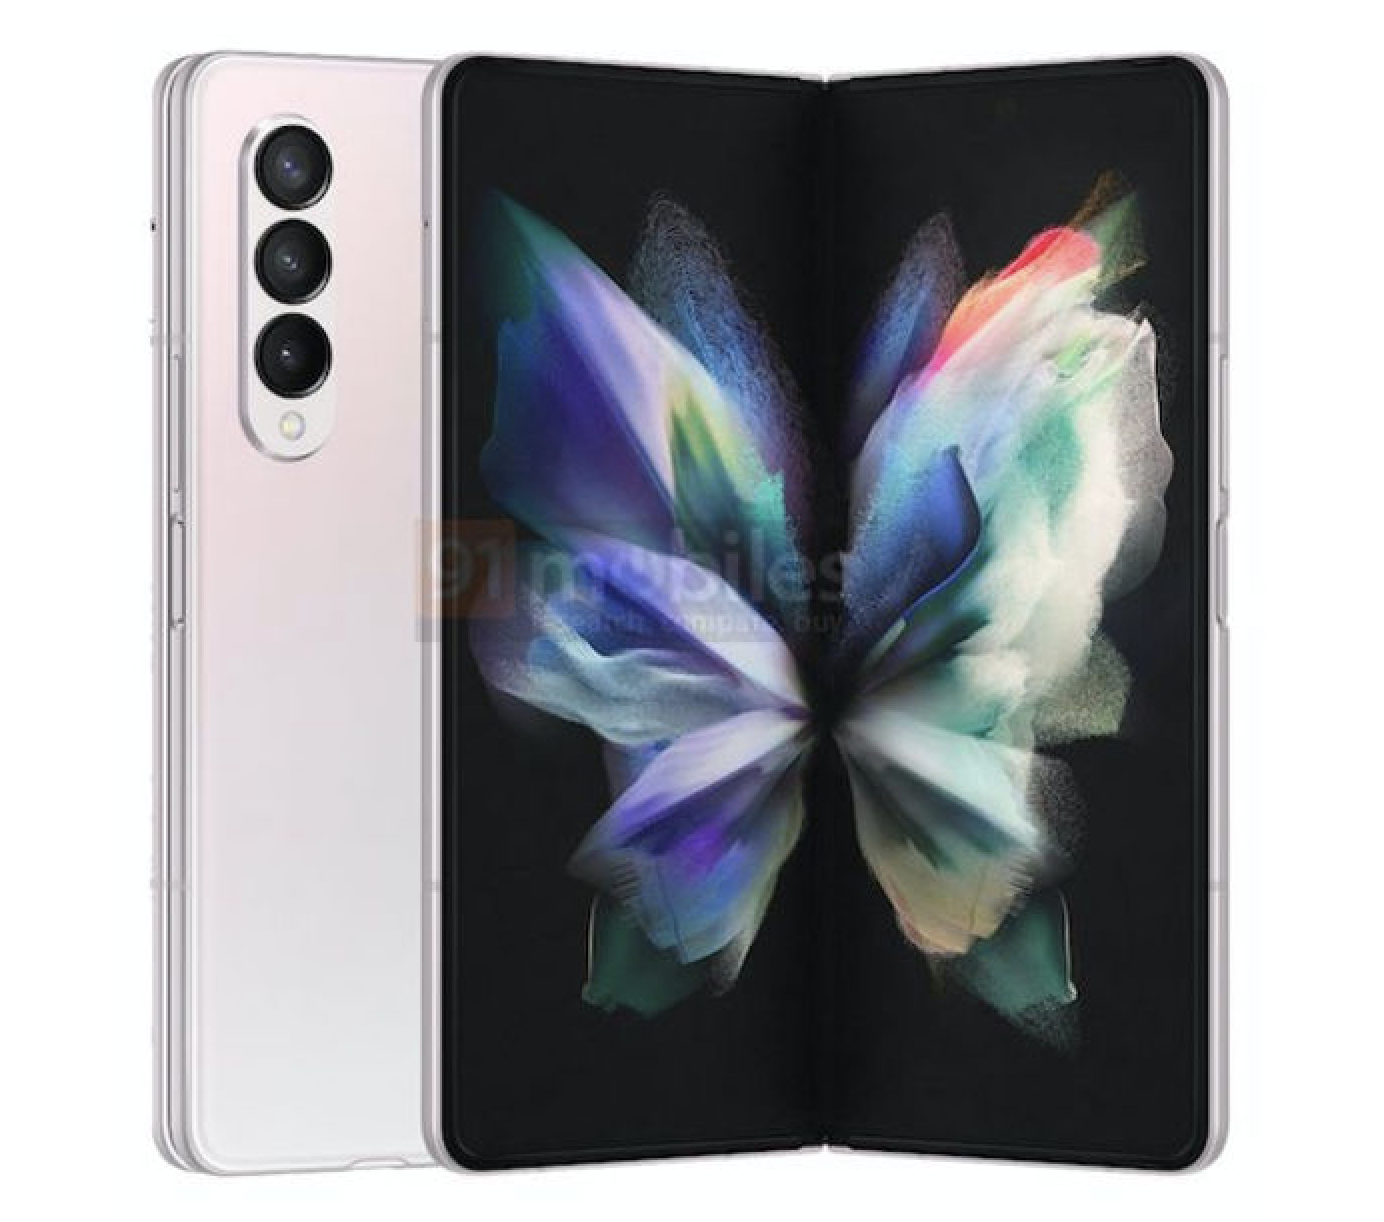 What will the Samsung Galaxy Z Fold 3 look like?